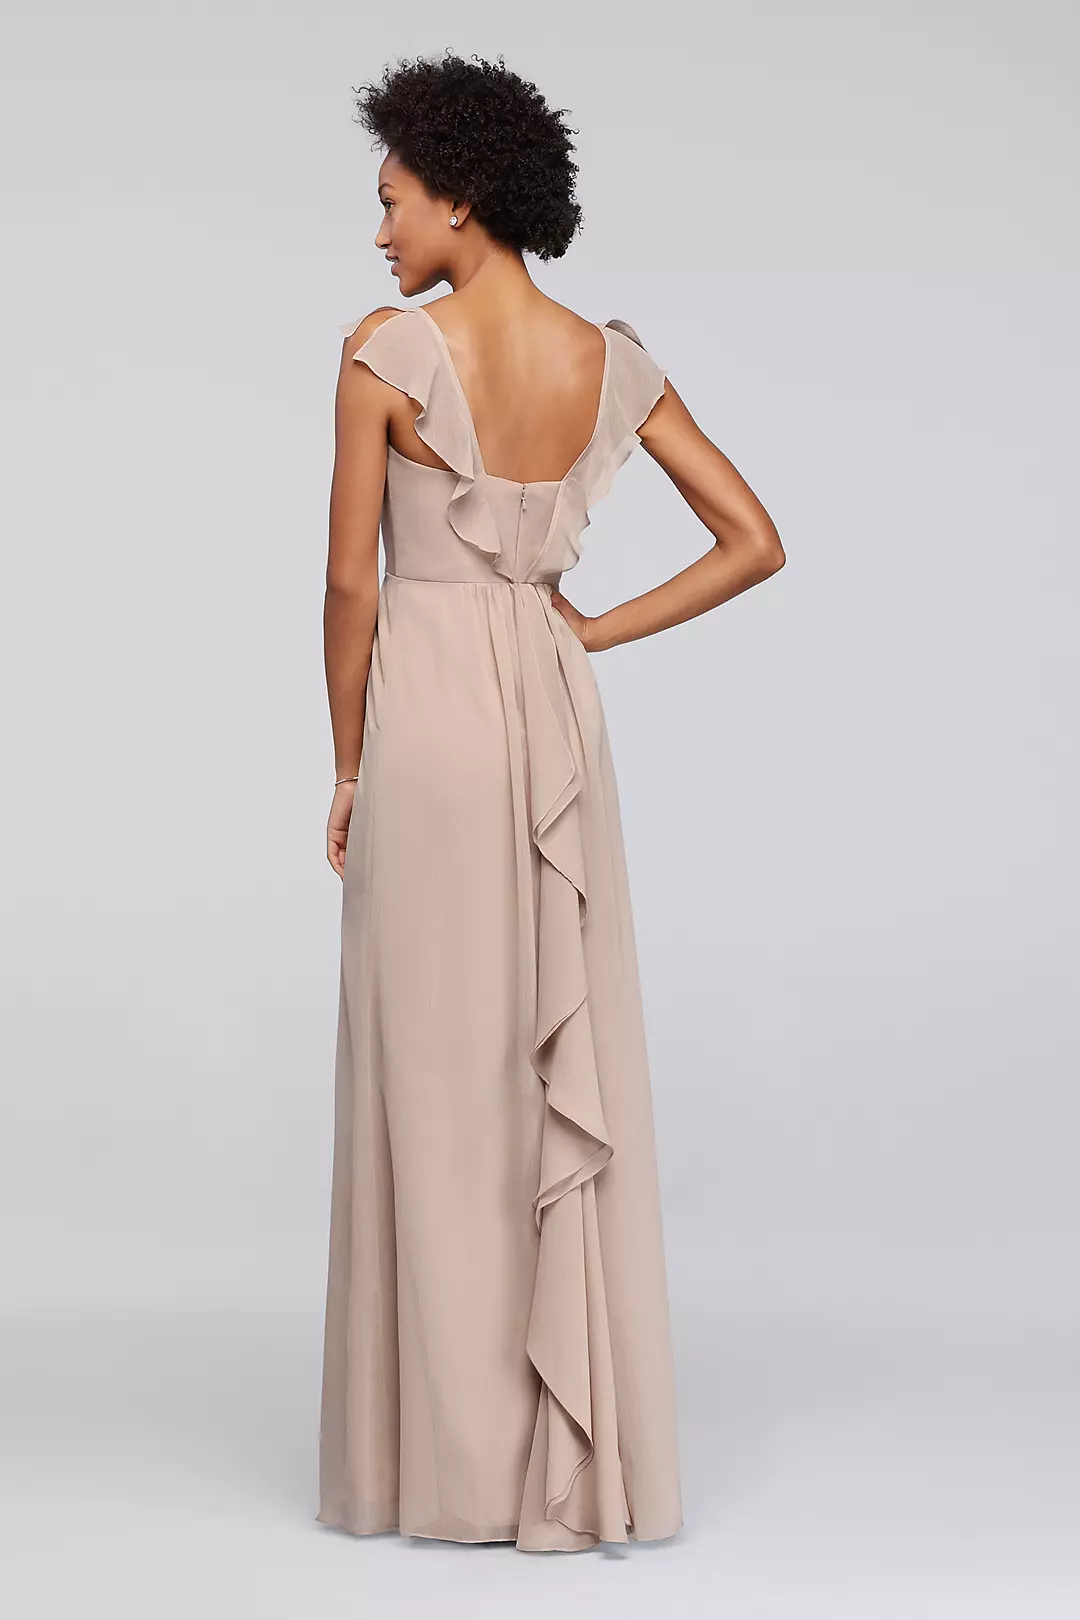 Long Bridesmaid Dress with Flutter Cap Sleeves Image 2